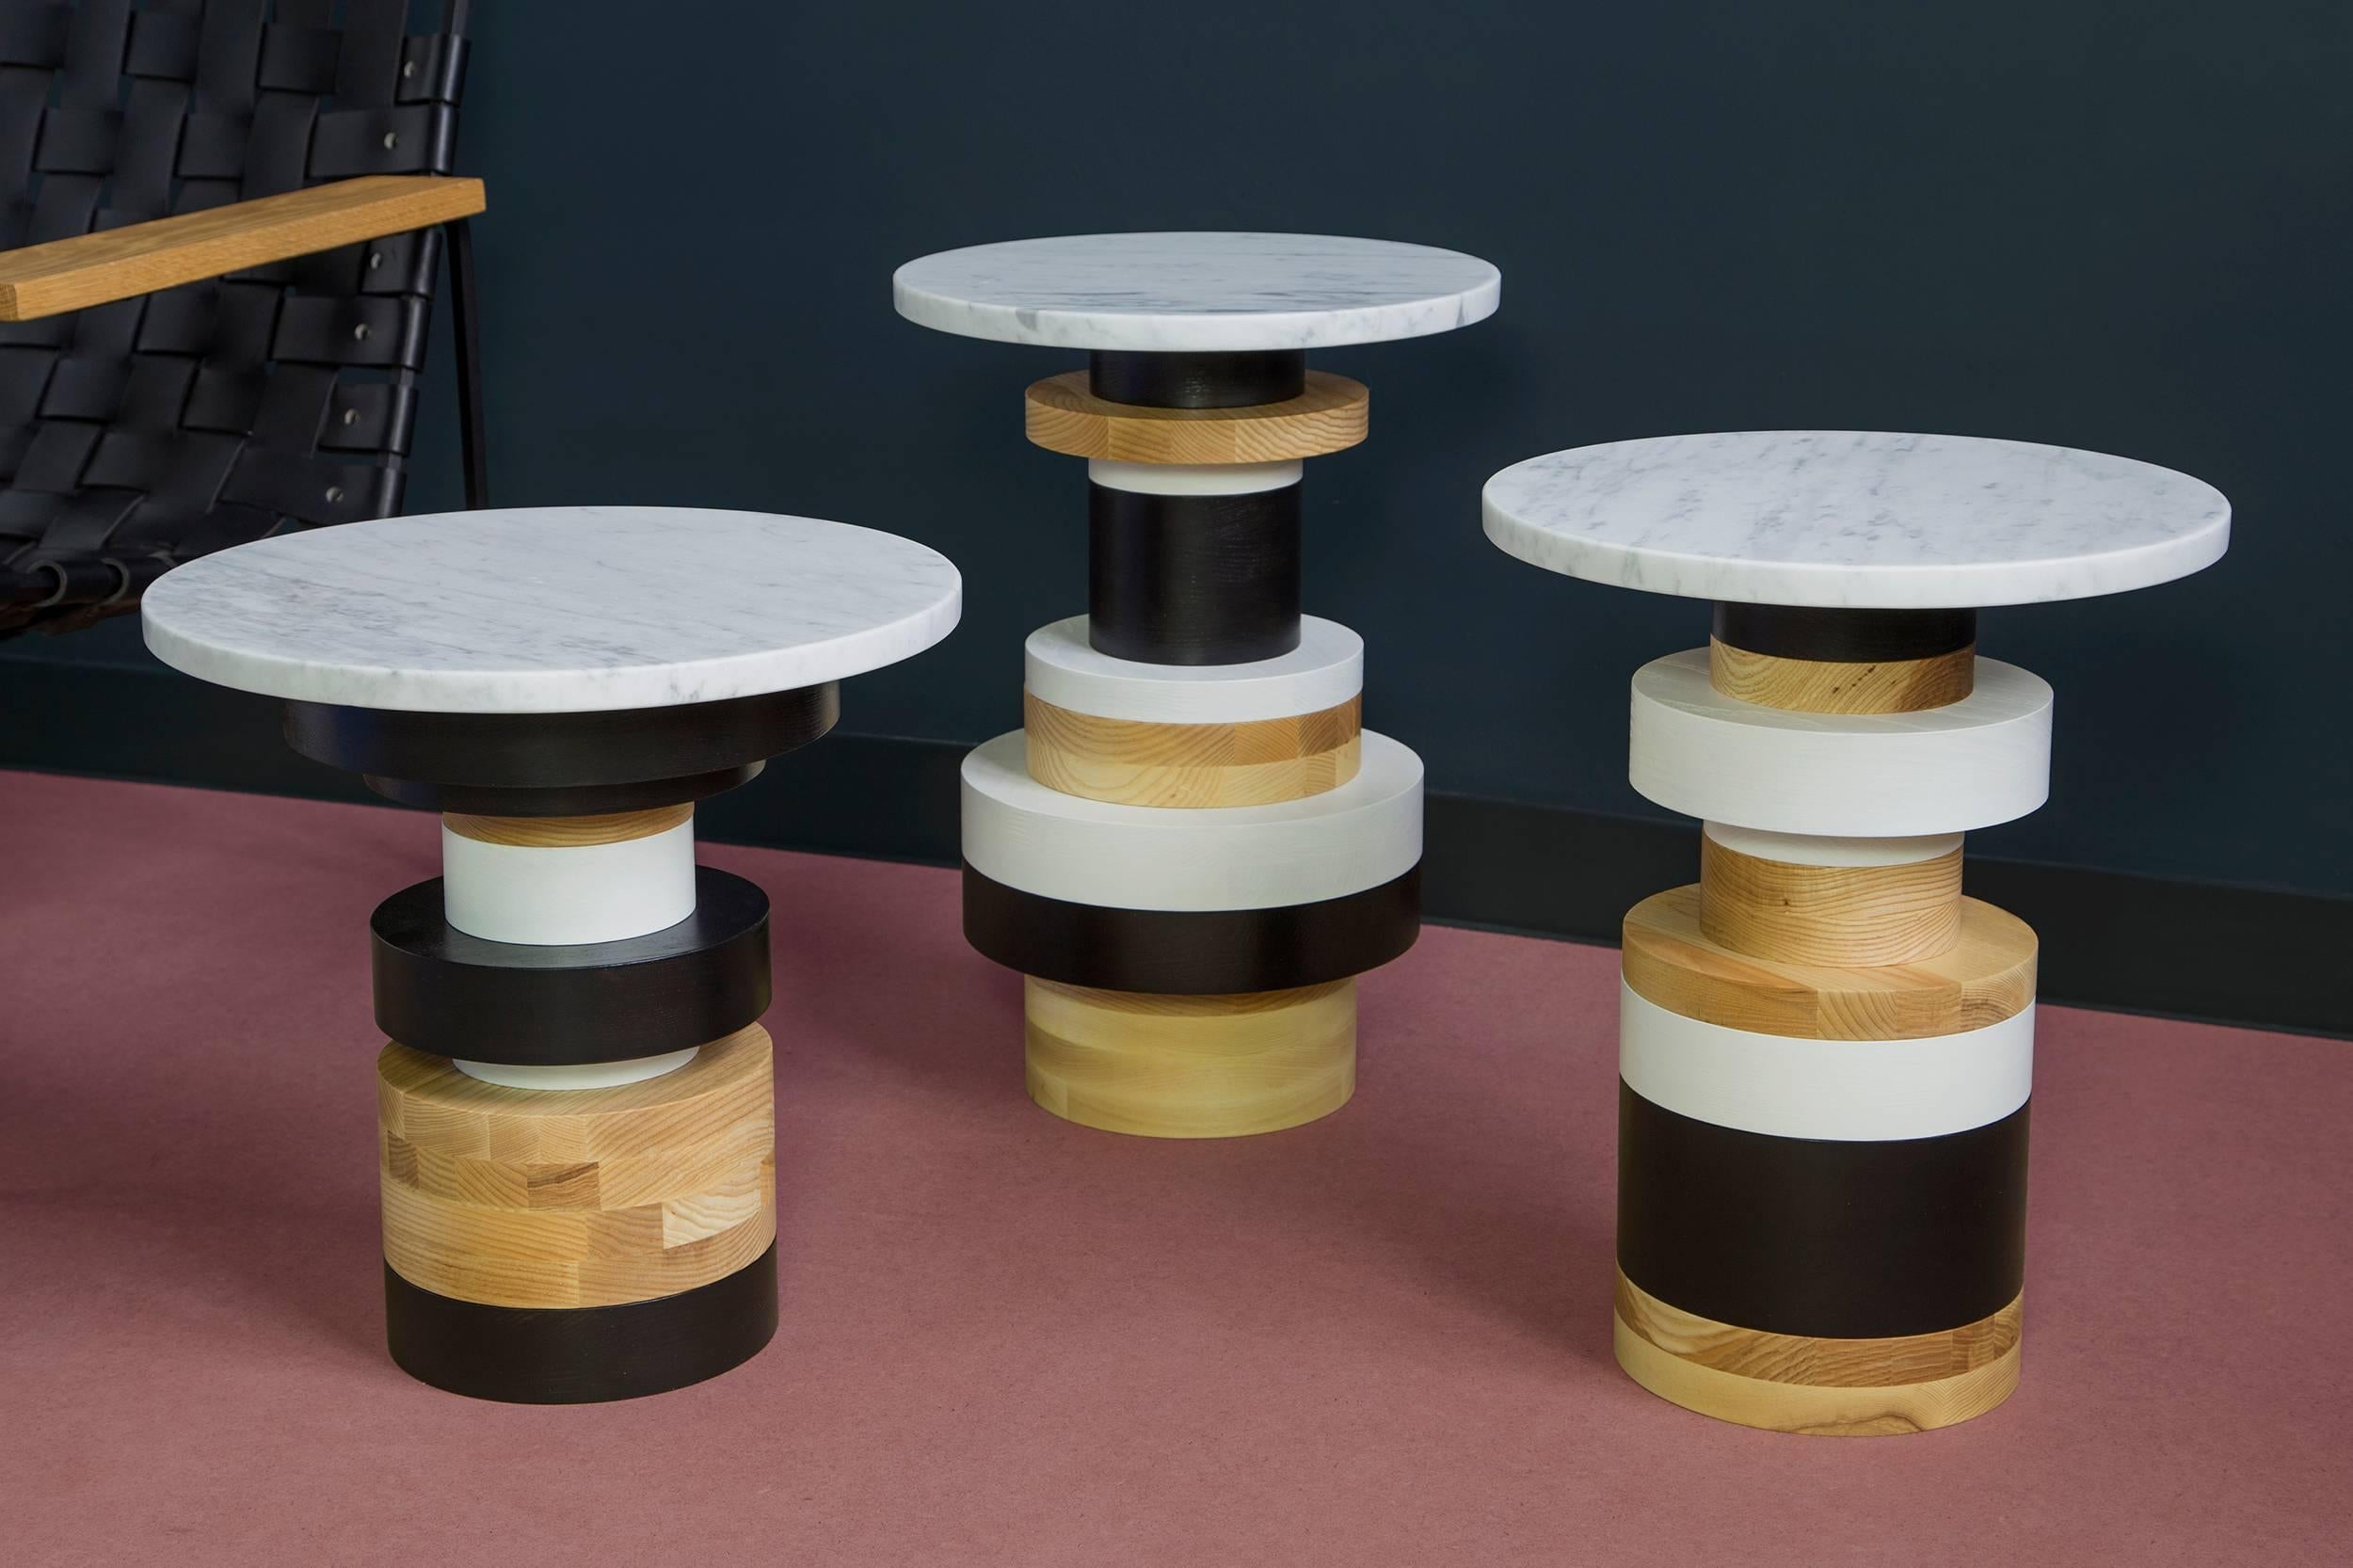 The Sottsass-inspired “Sass Tables” are simple, sculptural accents for any interior space. Made from stacked wooden bases and a honed marble top, Sass Tables are perfect individually or clustered. Measures: 16 inches tall with 14 inch marble top.